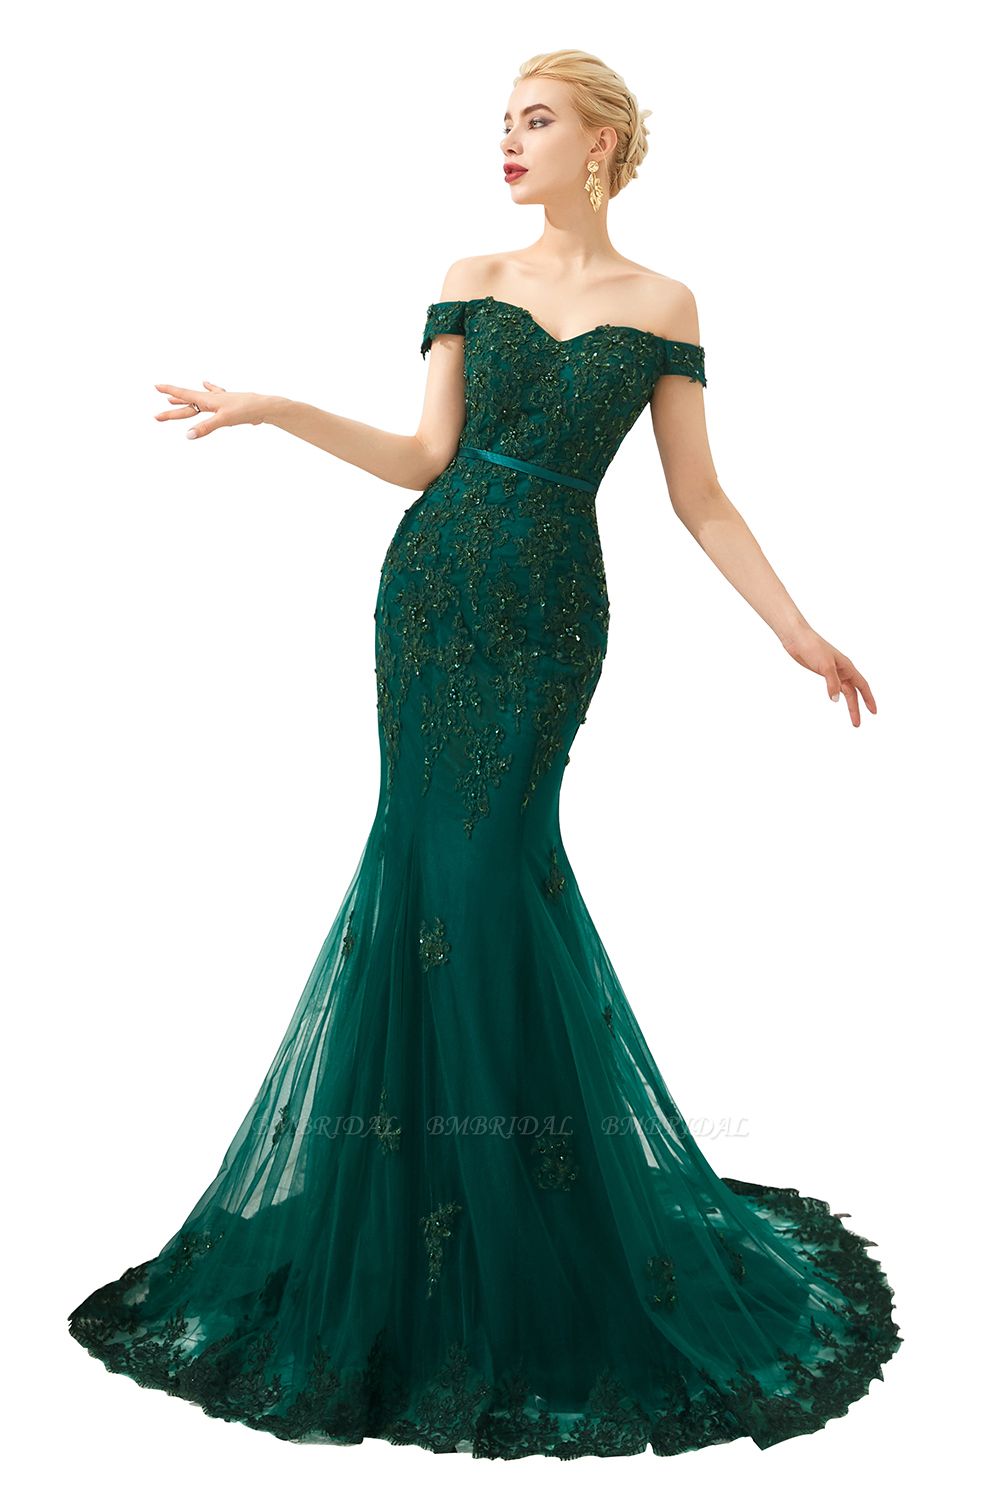 BMbridal Off-the-Shoulder Green Prom Dress Long Mermaid Evening Gowns With Lace Appliques